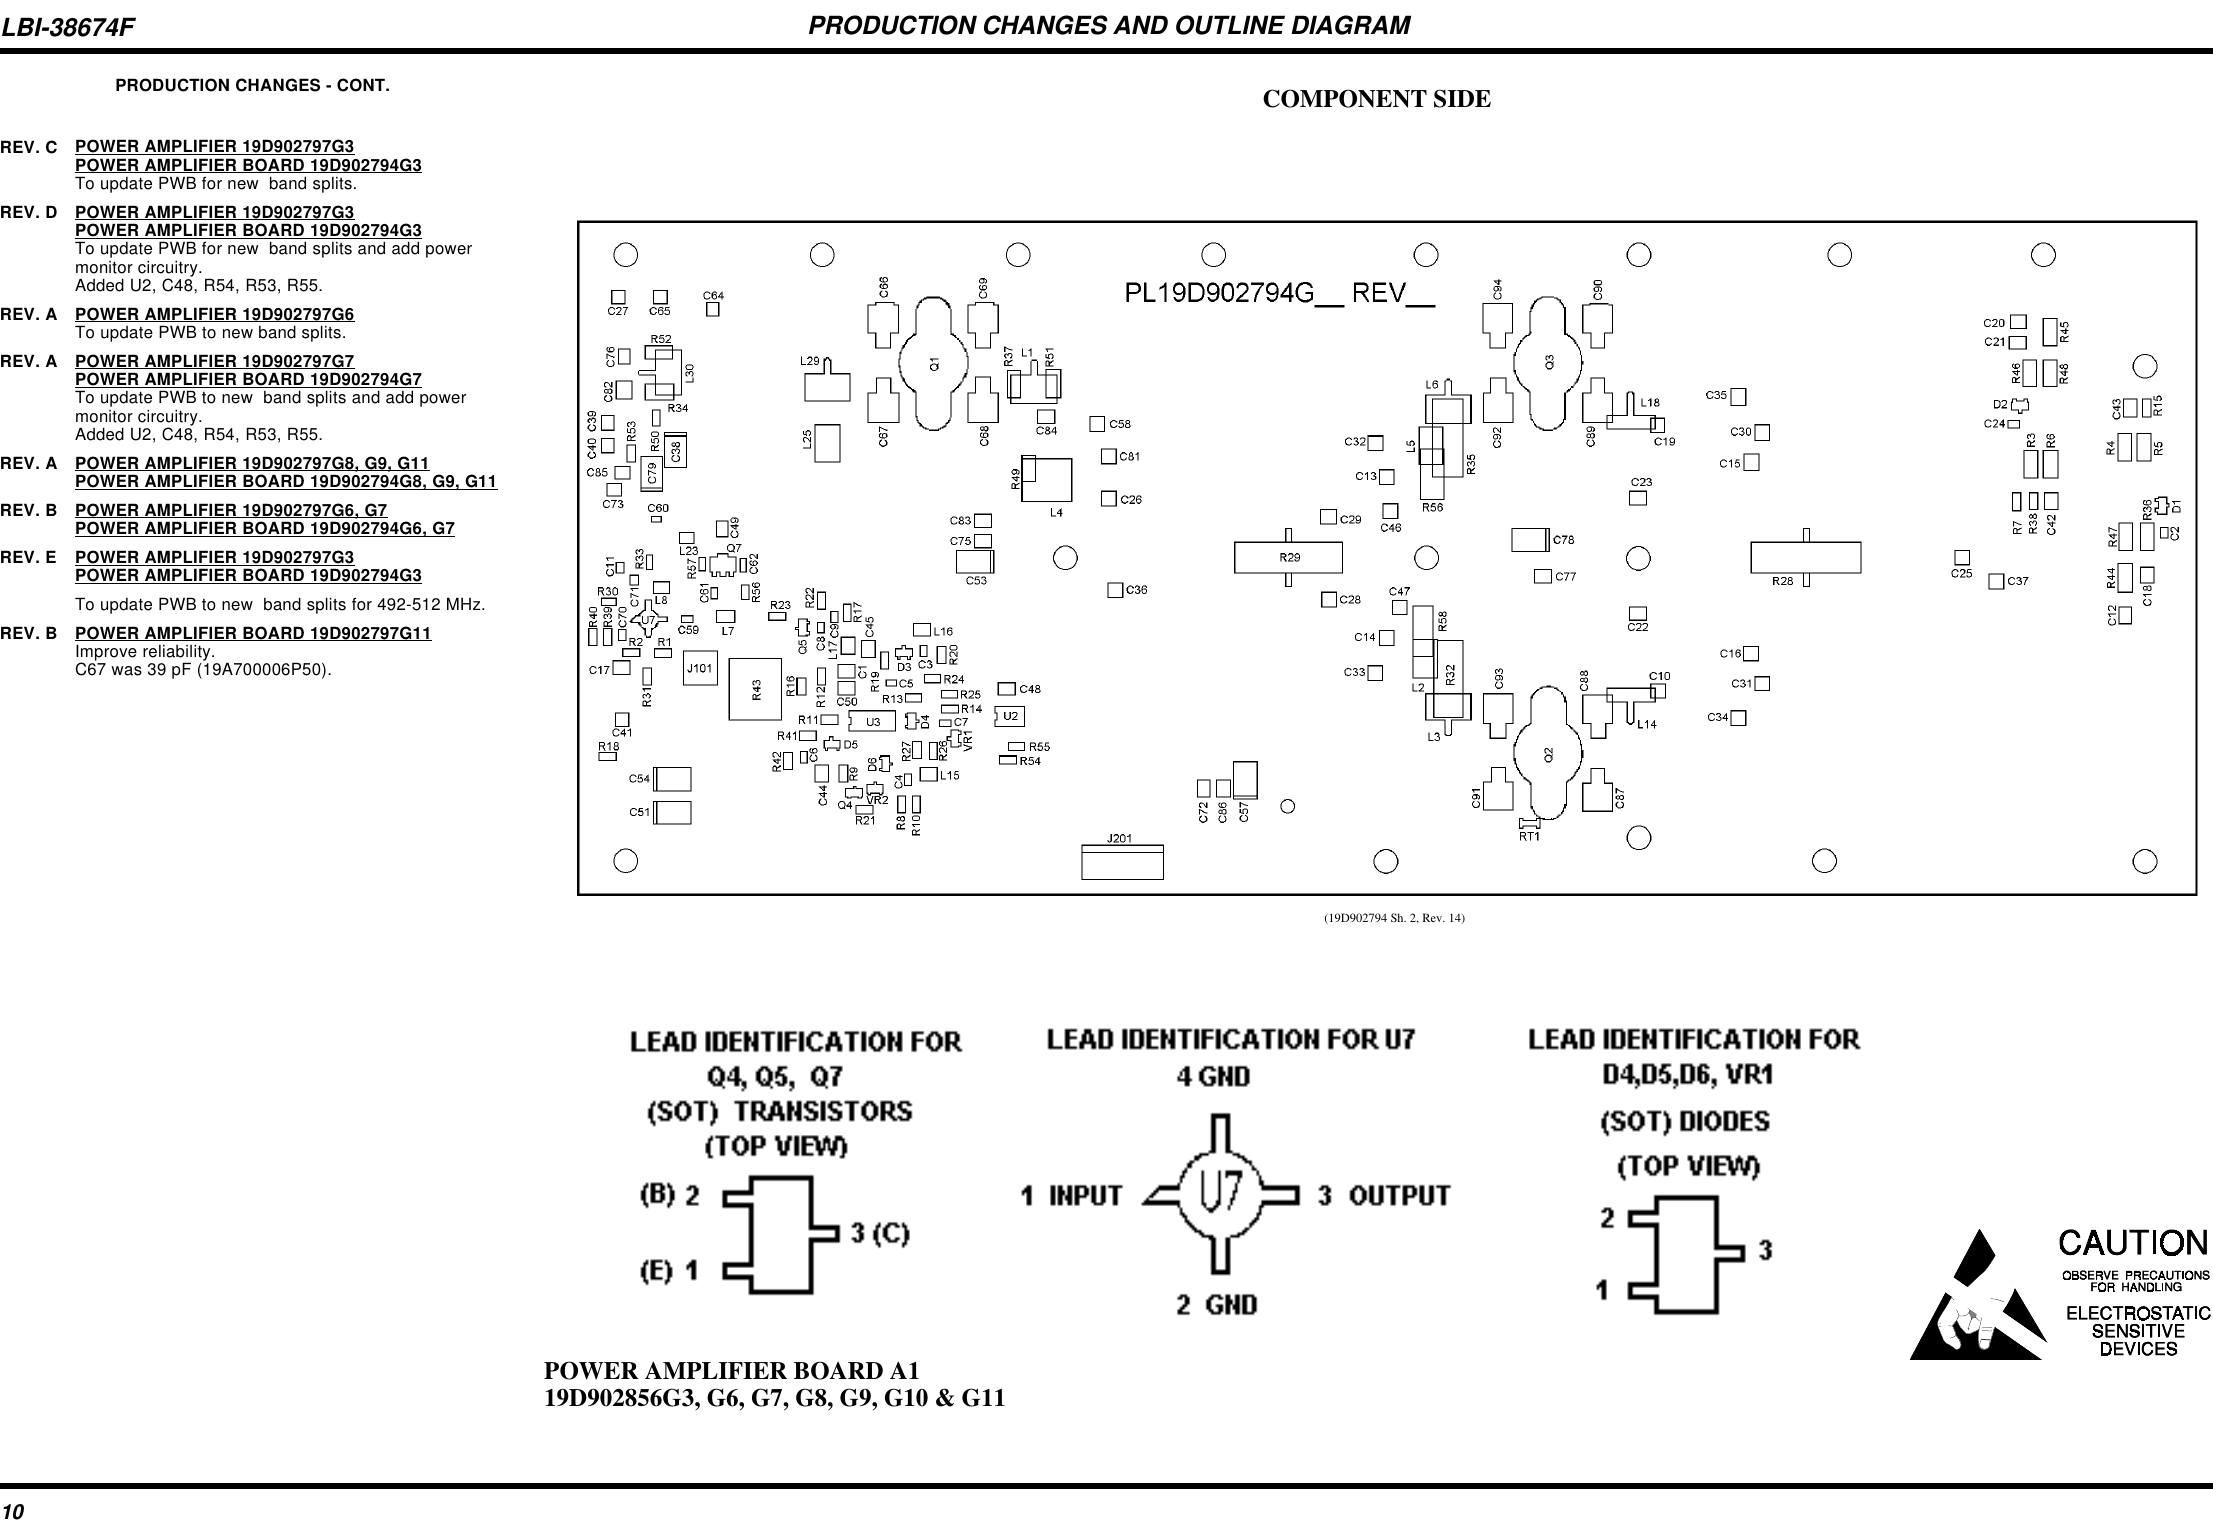 PRODUCTION CHANGES AND OUTLINE DIAGRAMPOWER AMPLIFIER BOARD A119D902856G3, G6, G7, G8, G9, G10 &amp; G11(19D902794 Sh. 2, Rev. 14)COMPONENT SIDEPRODUCTION CHANGES - CONT.REV. C POWER AMPLIFIER 19D902797G3POWER AMPLIFIER BOARD 19D902794G3To update PWB for new  band splits.REV. D POWER AMPLIFIER 19D902797G3POWER AMPLIFIER BOARD 19D902794G3To update PWB for new  band splits and add powermonitor circuitry. Added U2, C48, R54, R53, R55.REV. A POWER AMPLIFIER 19D902797G6To update PWB to new band splits.REV. A POWER AMPLIFIER 19D902797G7POWER AMPLIFIER BOARD 19D902794G7To update PWB to new  band splits and add powermonitor circuitry. Added U2, C48, R54, R53, R55.REV. A POWER AMPLIFIER 19D902797G8, G9, G11POWER AMPLIFIER BOARD 19D902794G8, G9, G11REV. B POWER AMPLIFIER 19D902797G6, G7POWER AMPLIFIER BOARD 19D902794G6, G7REV. E POWER AMPLIFIER 19D902797G3POWER AMPLIFIER BOARD 19D902794G3To update PWB to new  band splits for 492-512 MHz.REV. B POWER AMPLIFIER BOARD 19D902797G11Improve reliability.C67 was 39 pF (19A700006P50).LBI-38674F10